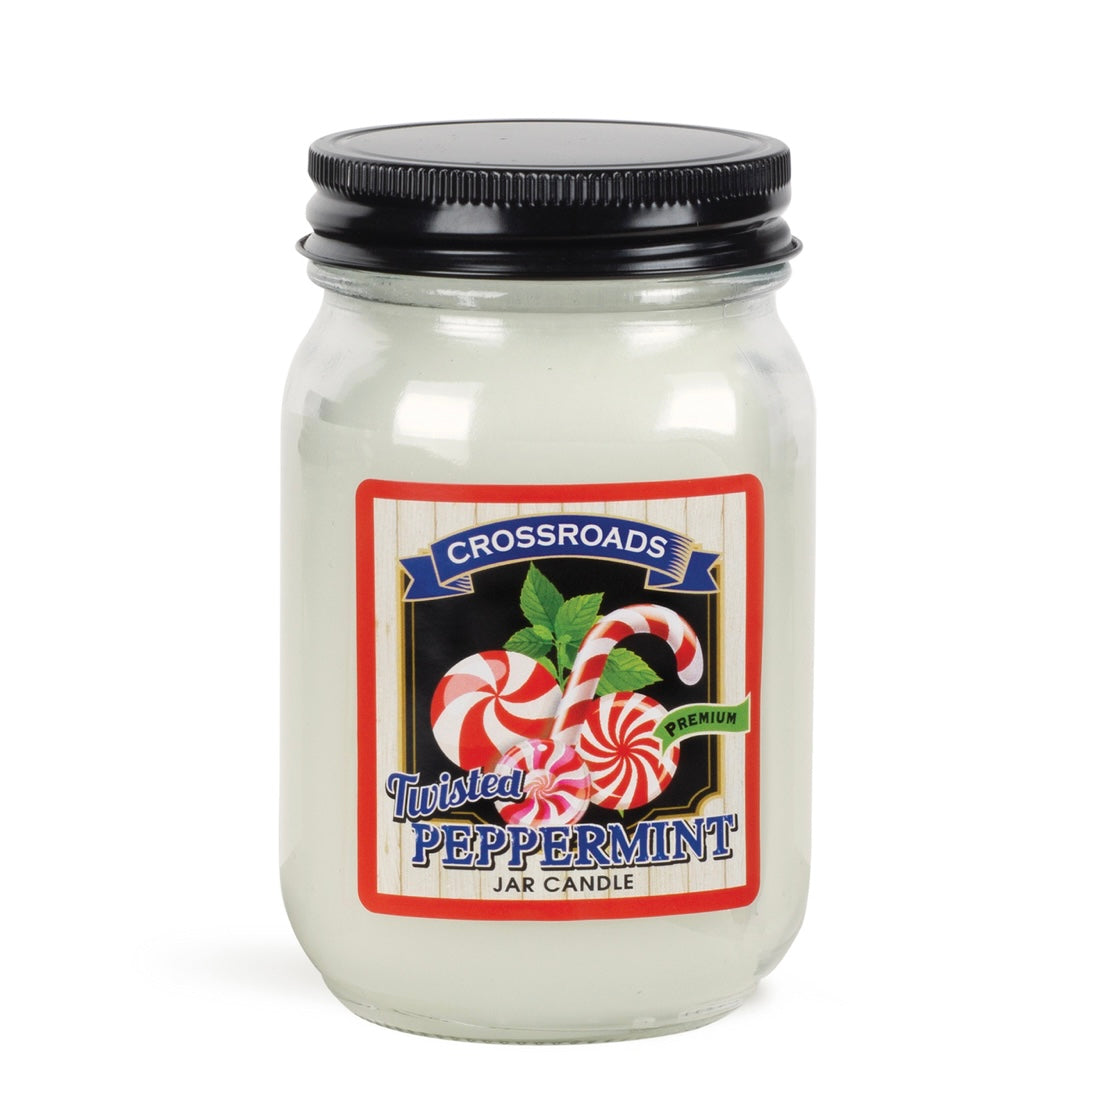 Twisted Peppermint Candle